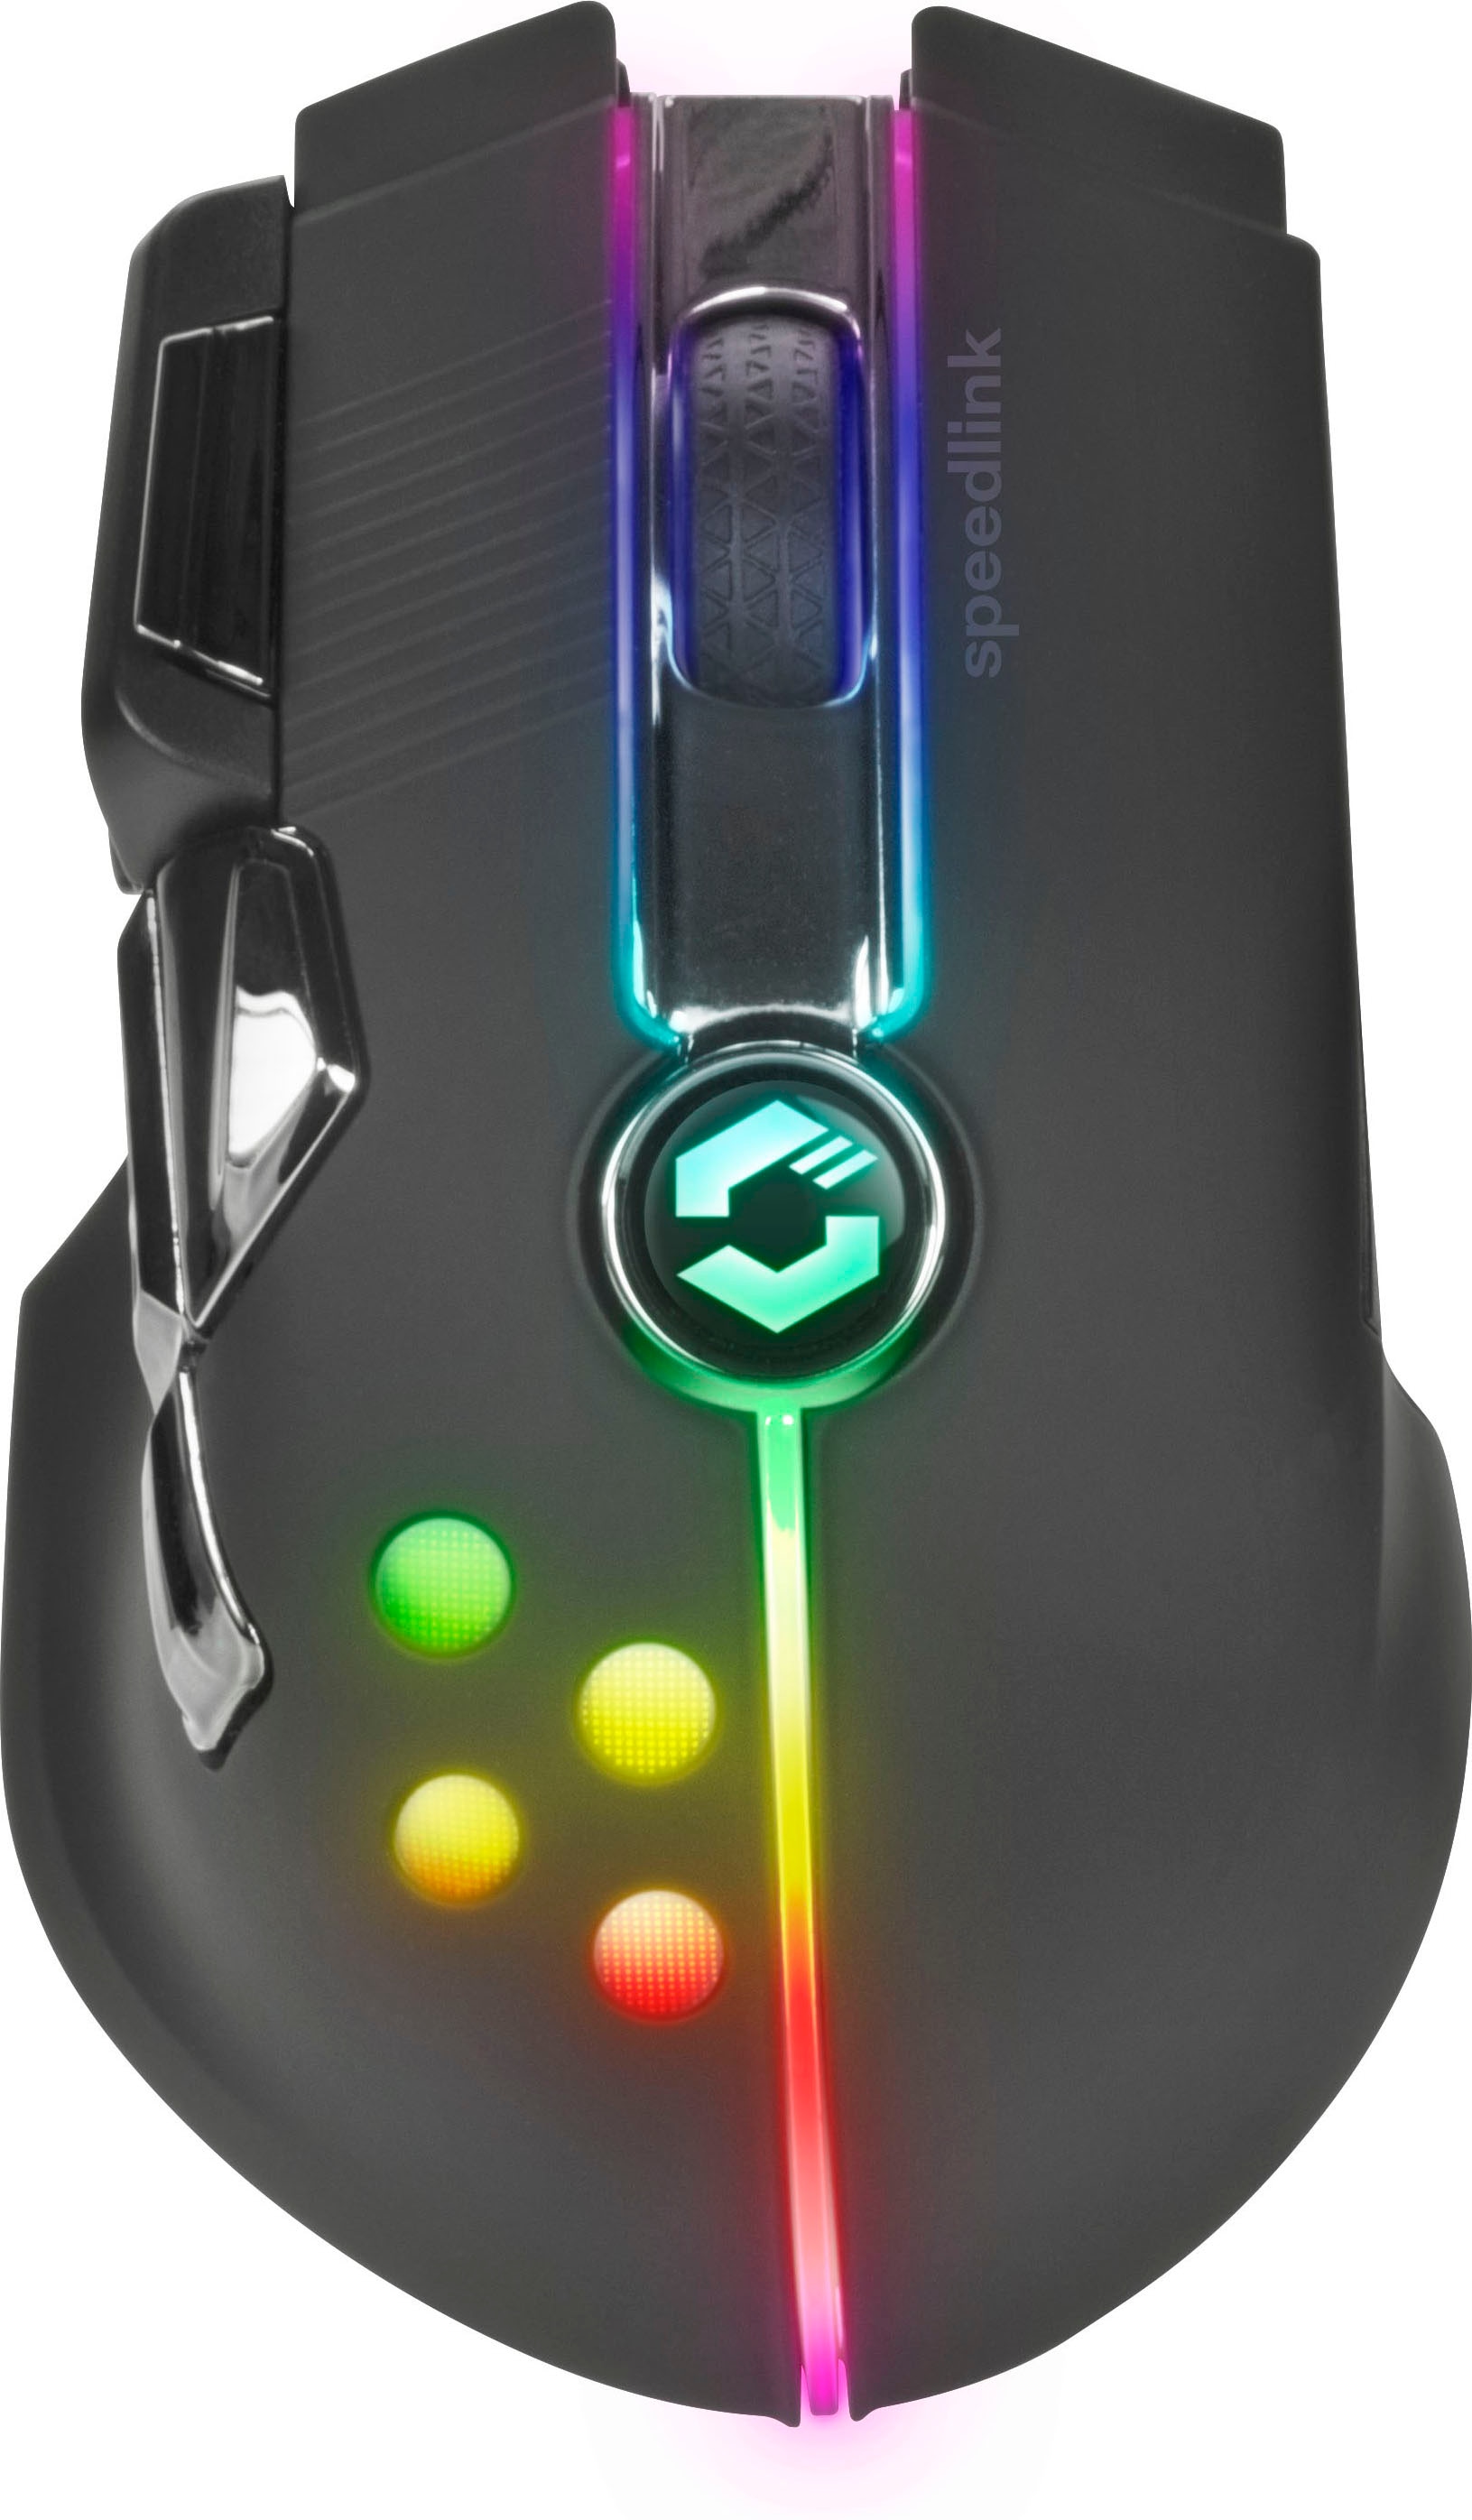 Gaming-Maus »IMPERIOR wireless«, RGB-Beleuchtung